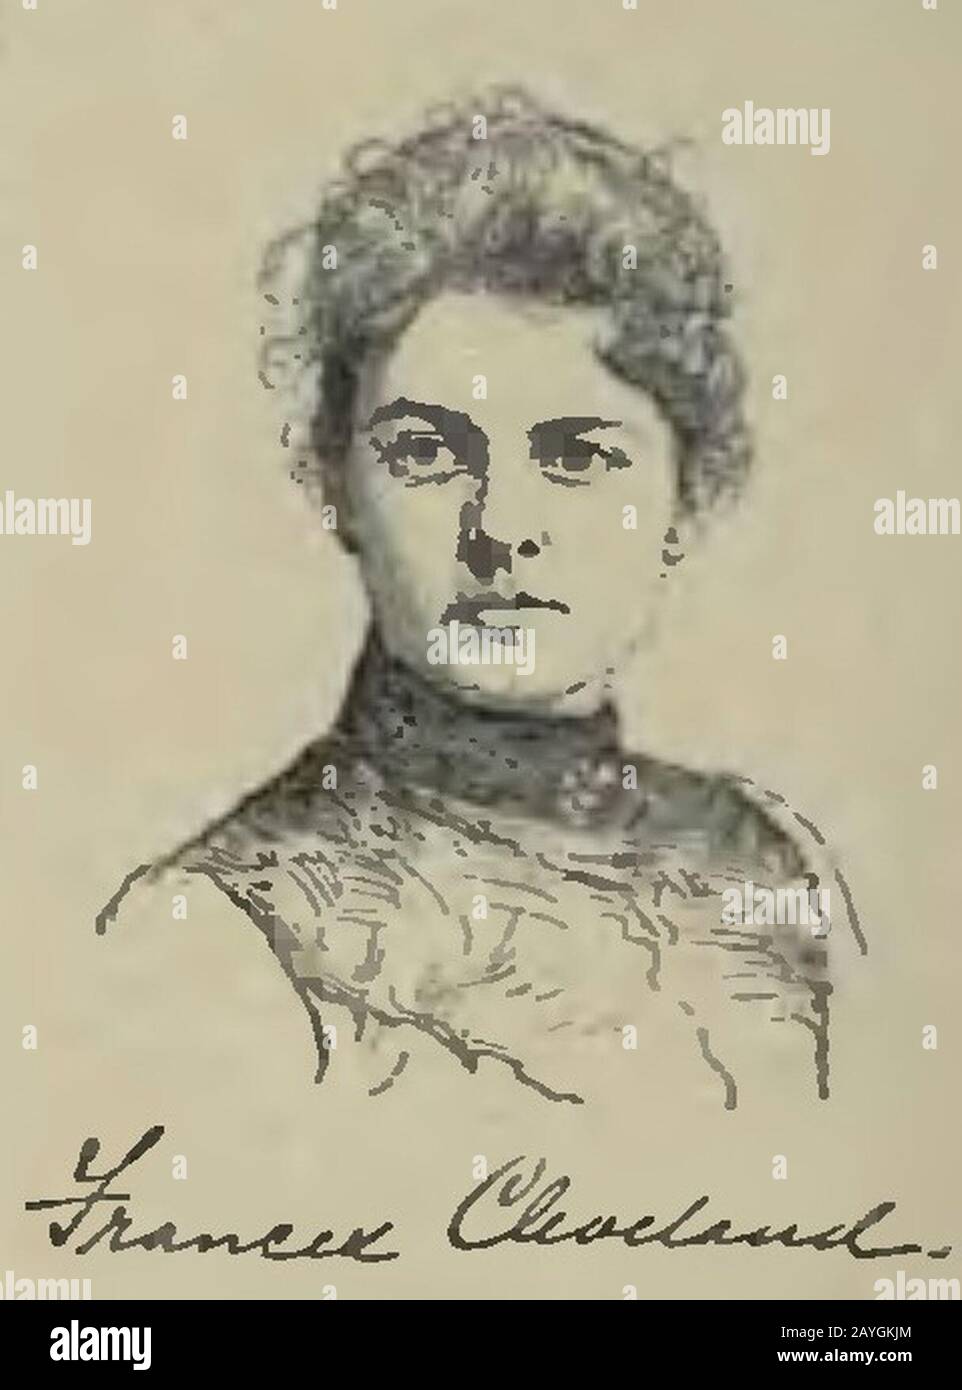 Frances Folsom Cleveland - Appletons' Cyclopædia of American Biography (1900, volume 7) (page 96 crop). Stock Photo